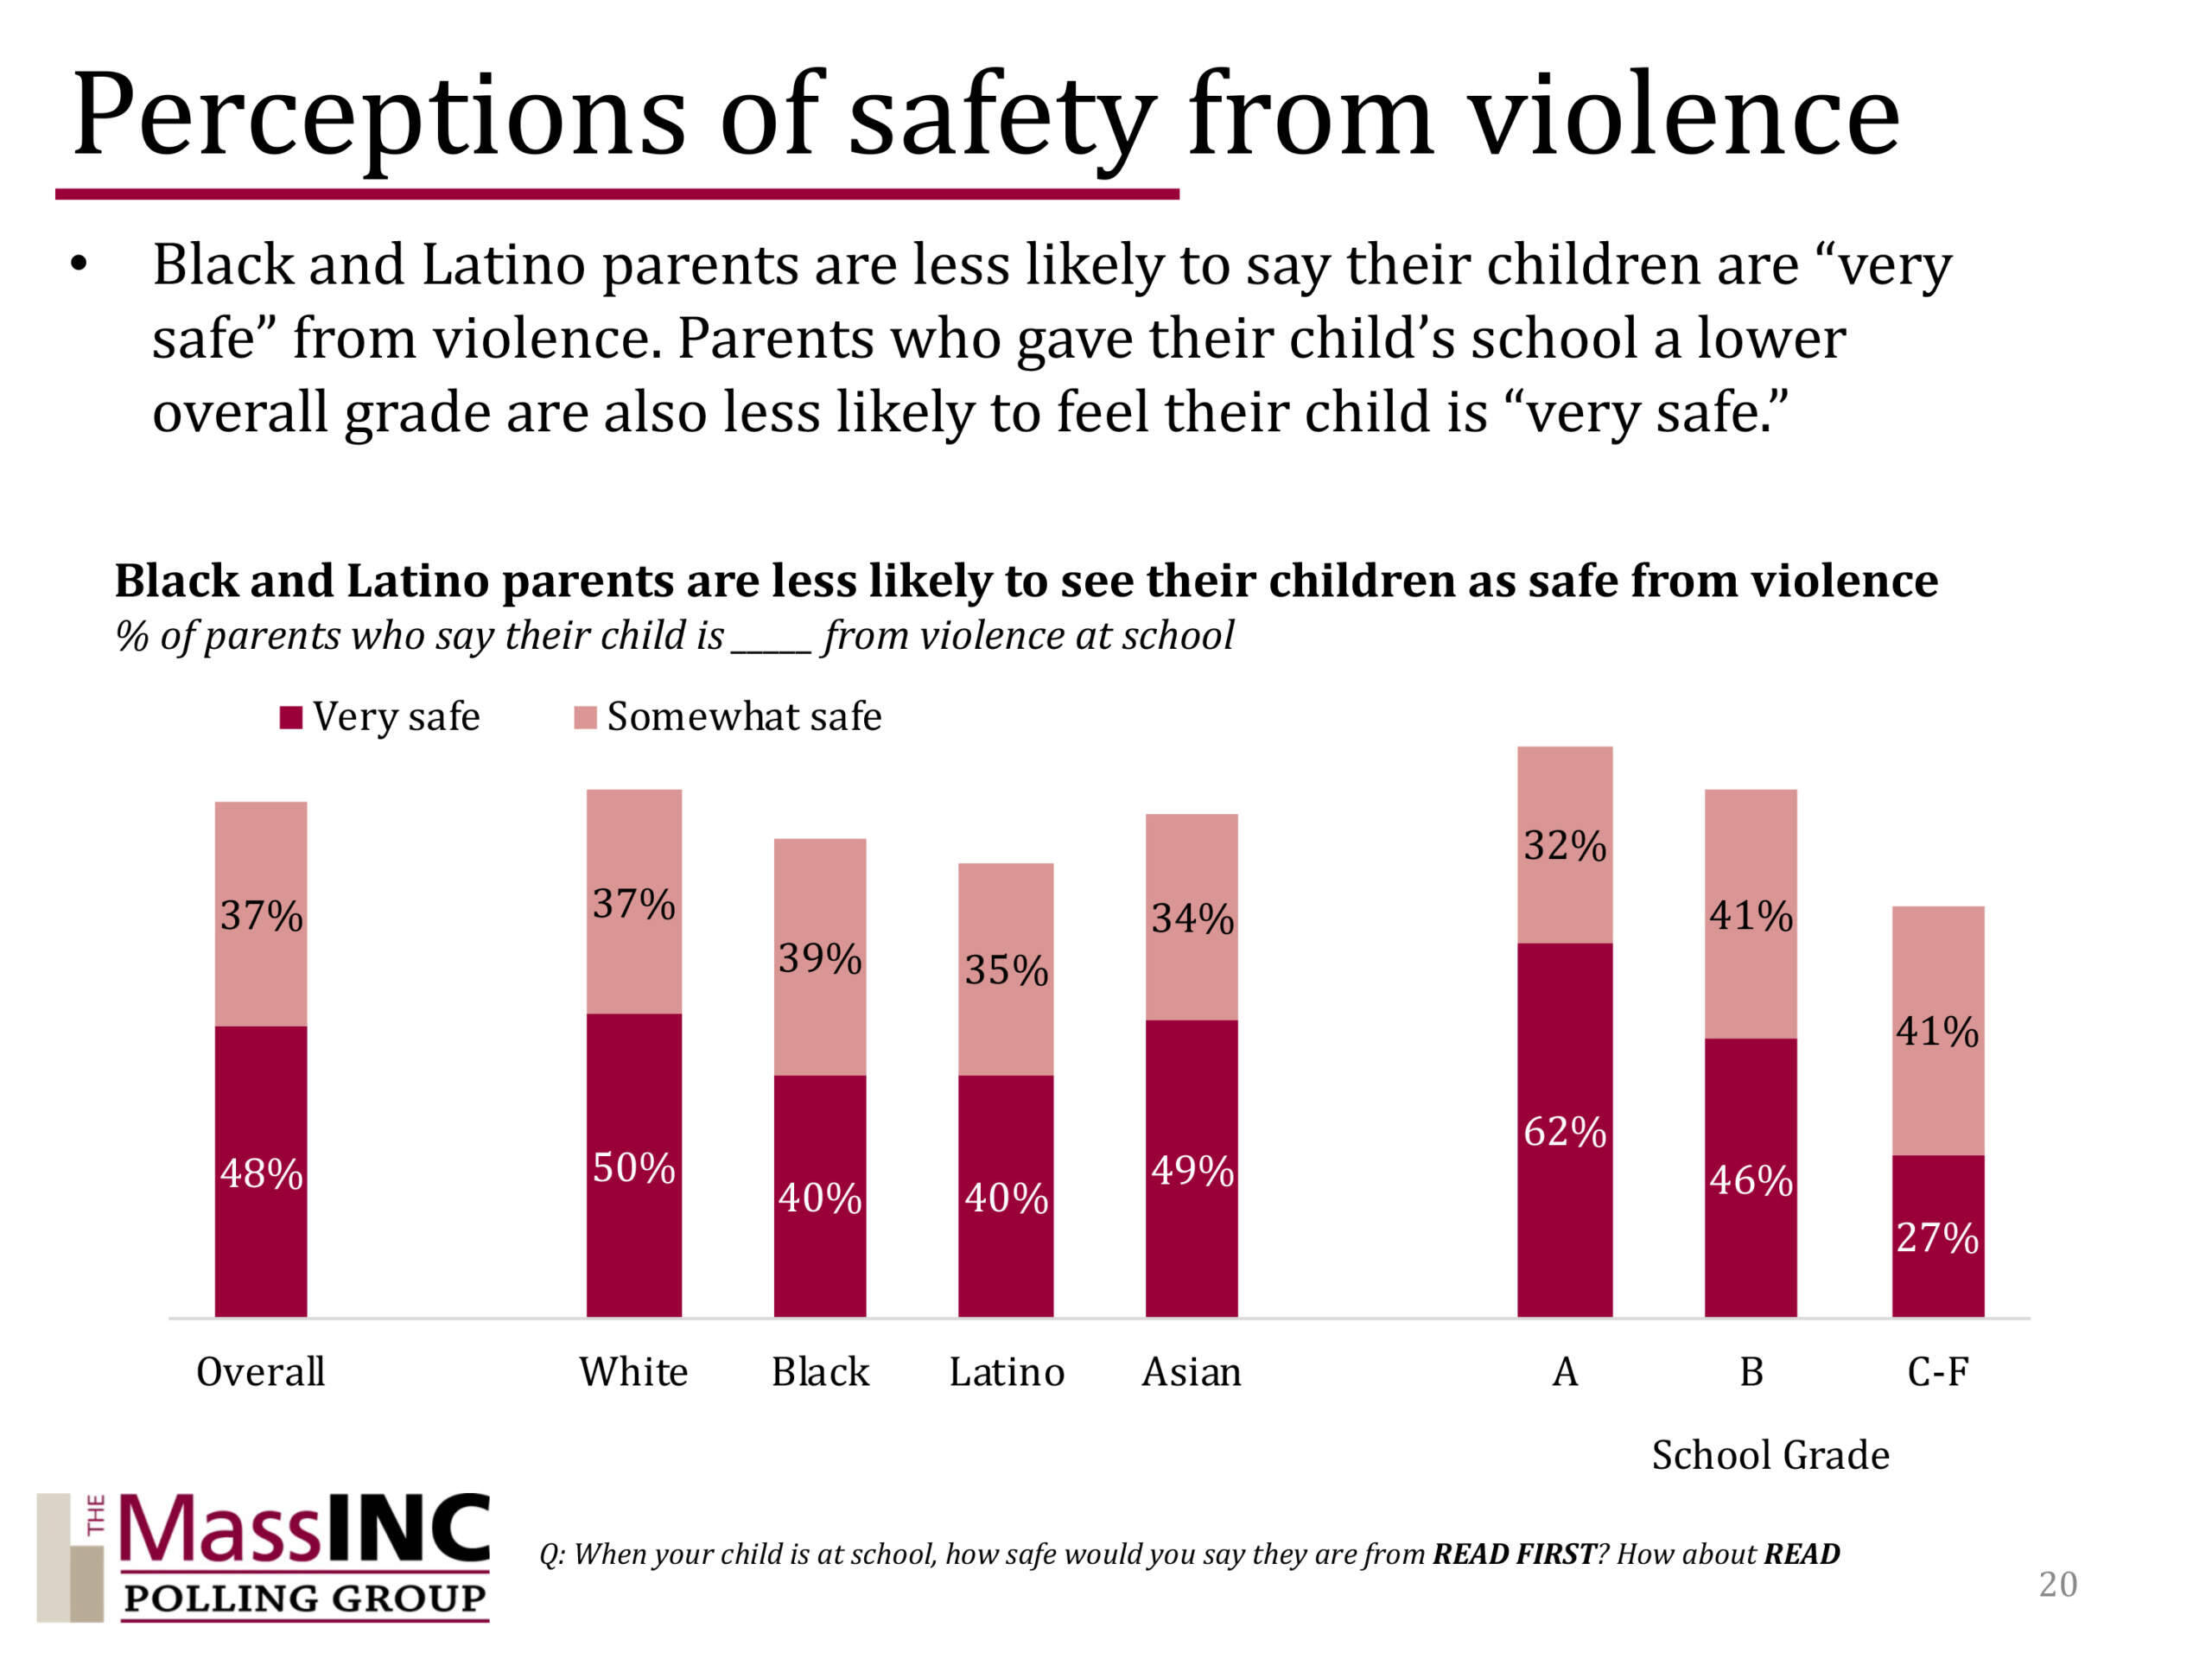 (Courtesy MassINC Polling Group and The Education Trust)